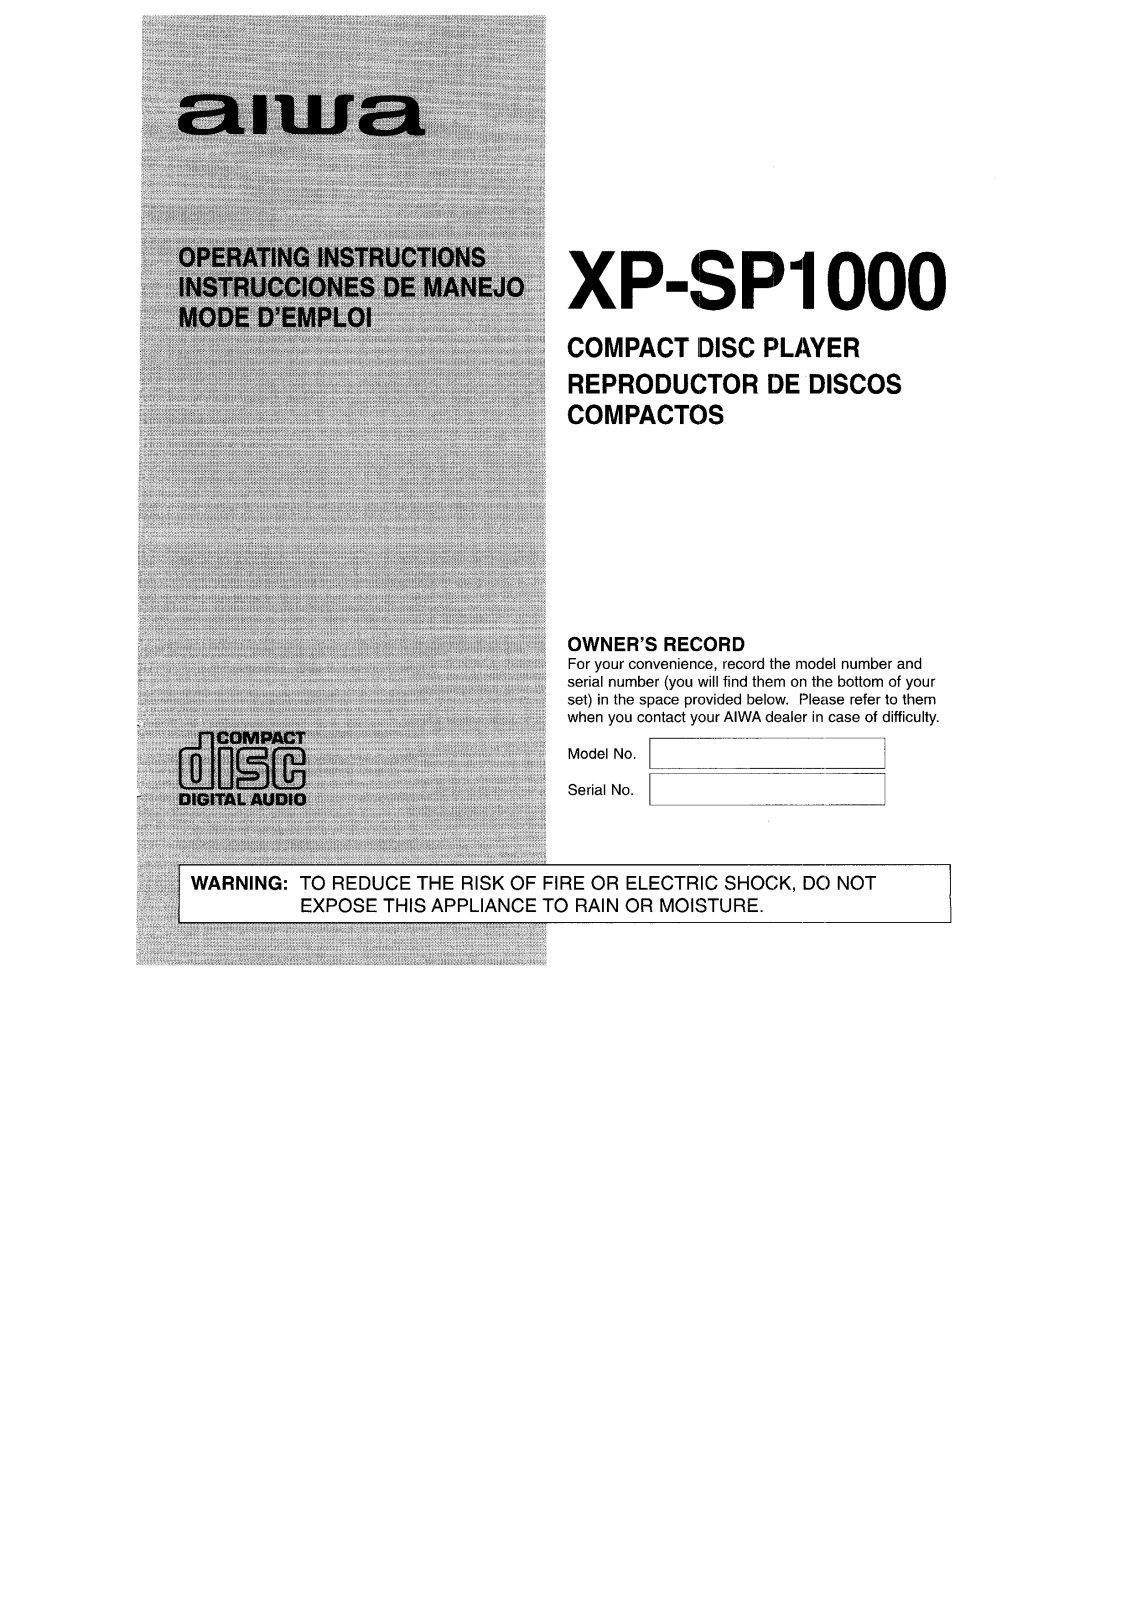 Sony XPSP1000 User Manual